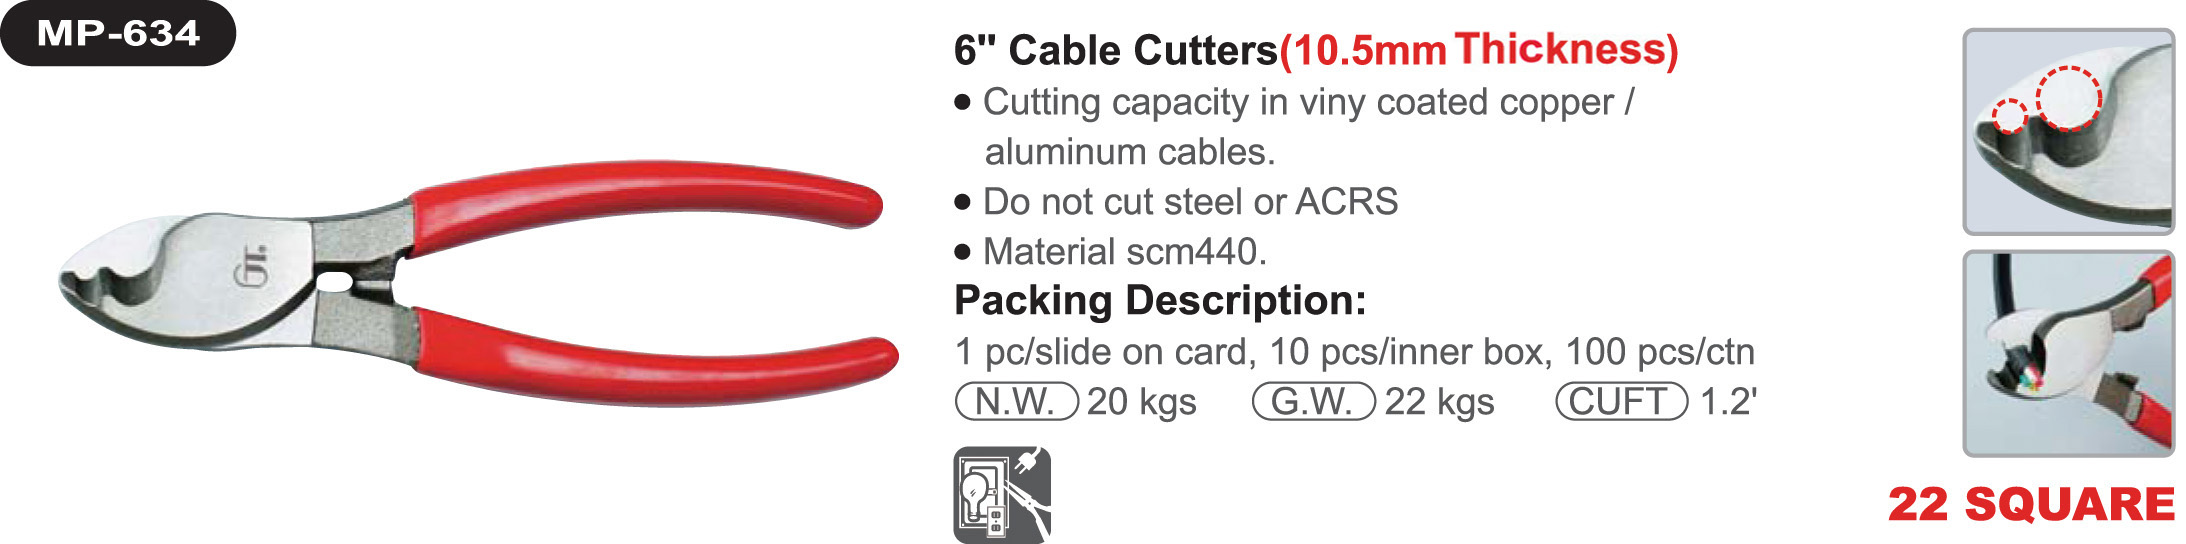 proimages/product/pliers/cable_and_wire_rope_cutter/Precision_Cable_Cutter/MP-634/MP-634.jpg